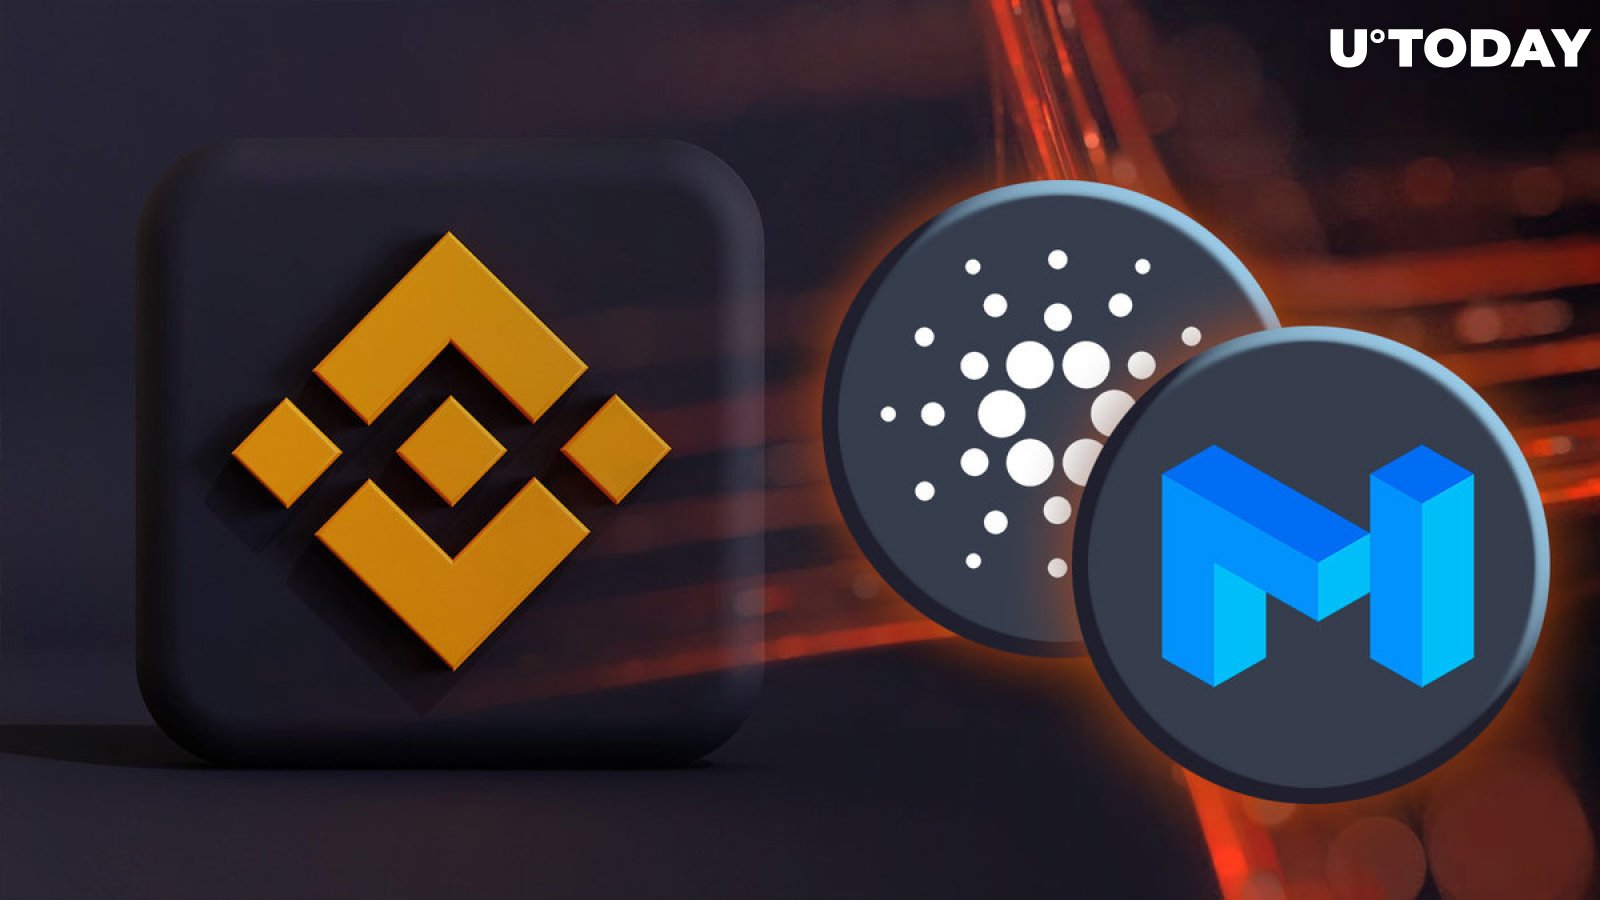 Binance to Delist New ADA and MATIC Trading Pairs